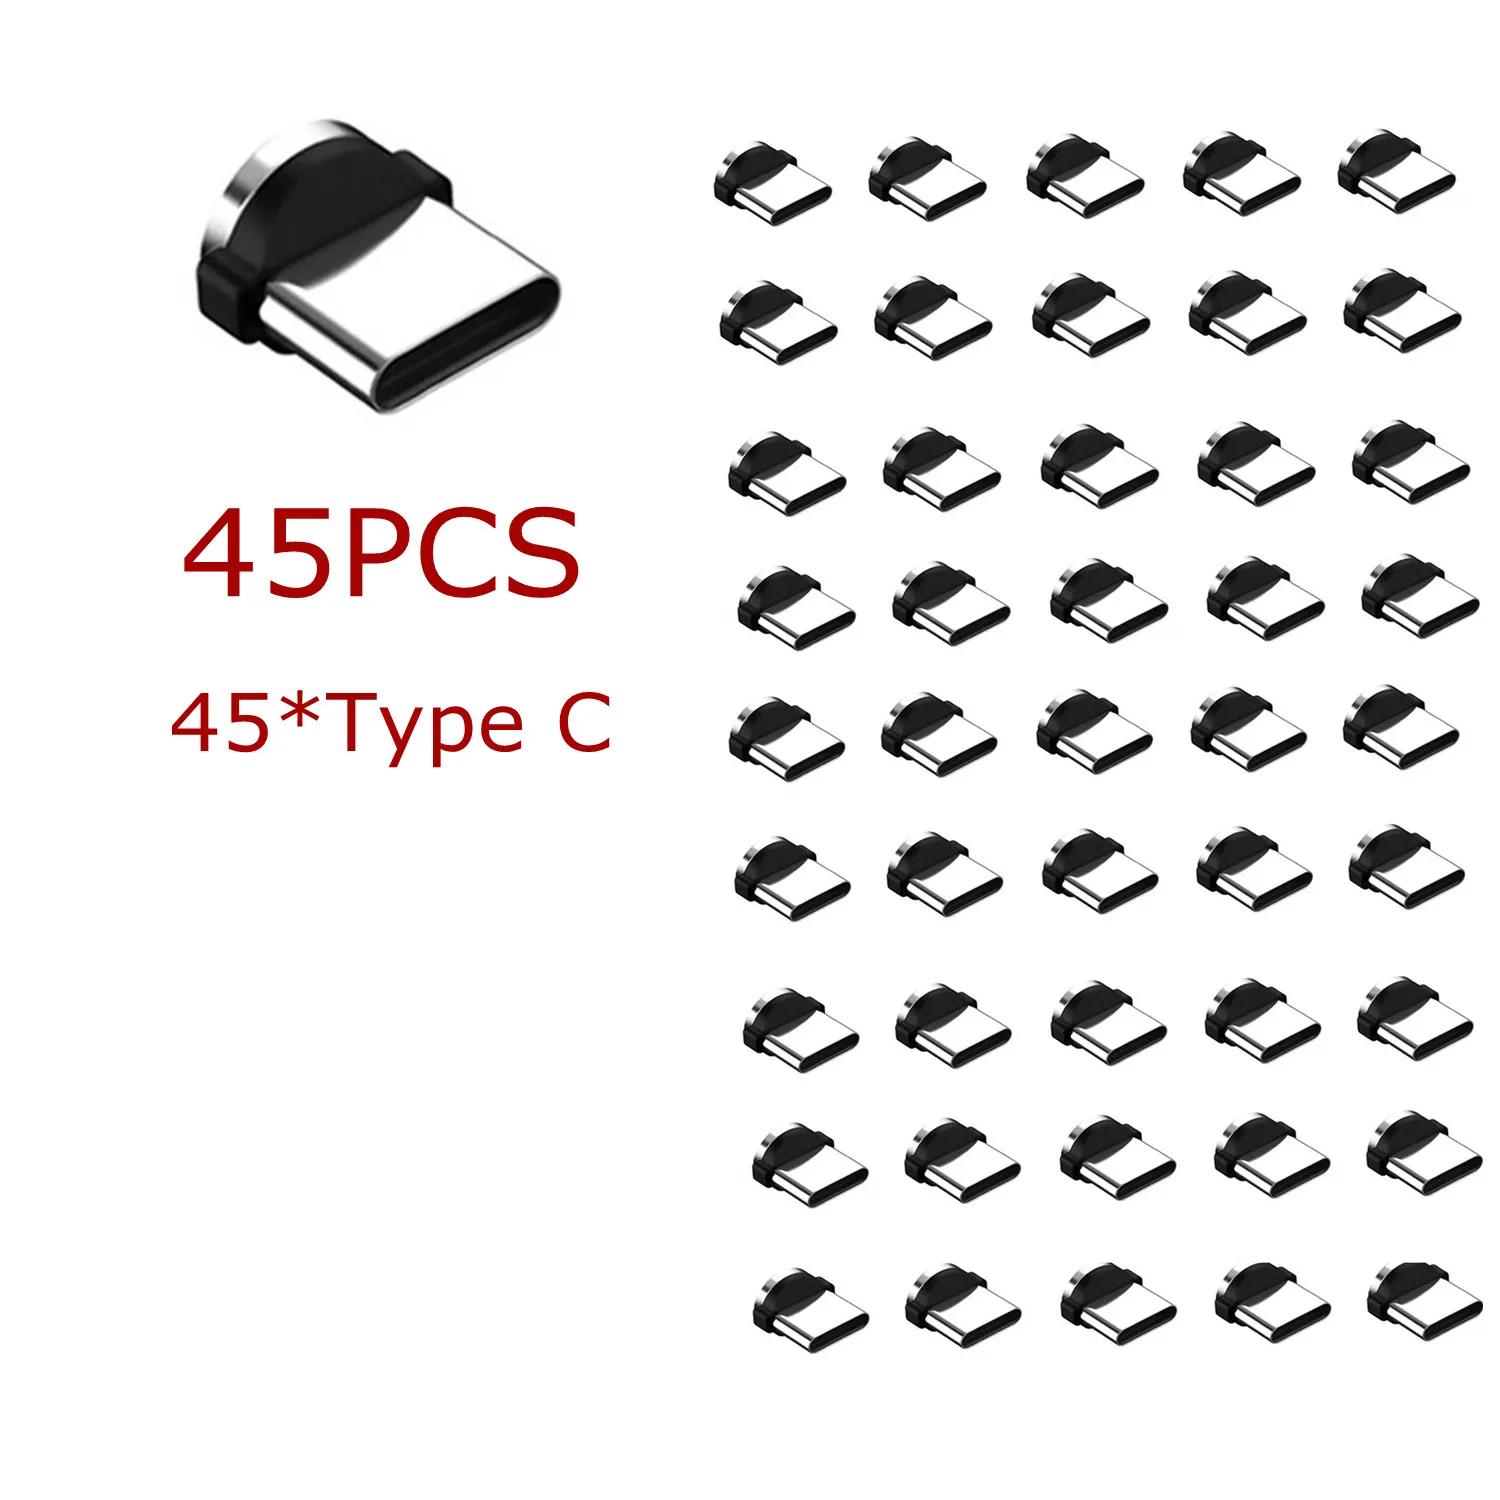 lovebay 45 pcs magnetic tips for iphone samsung mobile phone replacement parts 3 in 1 plug micro converter cable adapter type c free global shipping